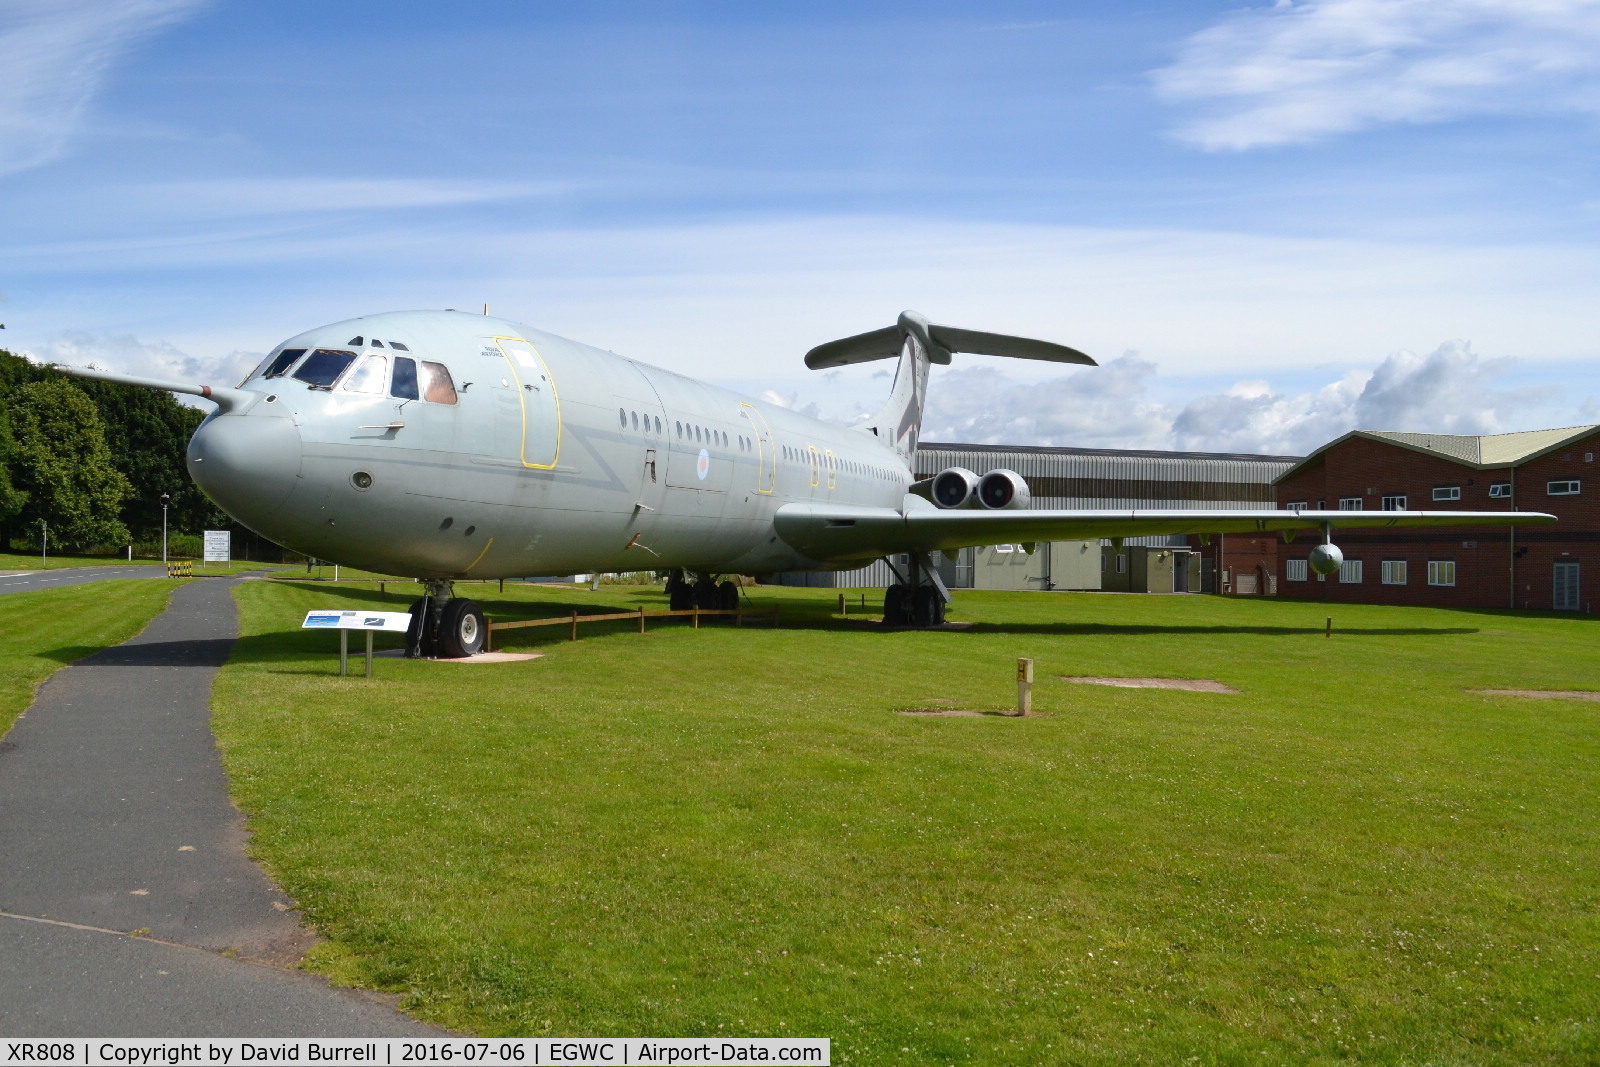 XR808, 1966 Vickers VC10 C.1 C/N 828, VC10 C.1 at RAF Museum Cosford